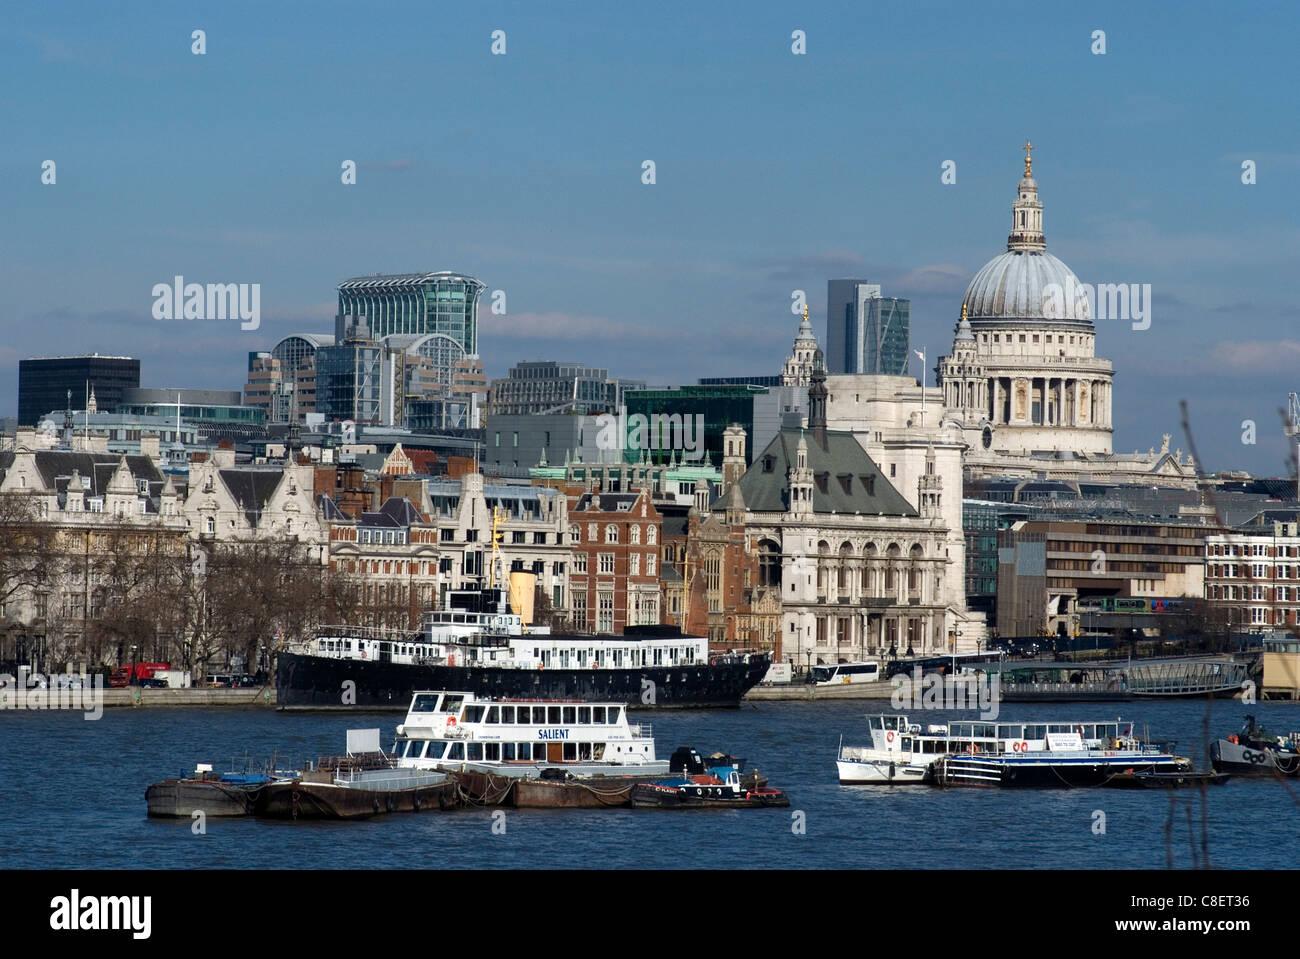 View from Waterloo Bridge overlooking the Thames and the City, including St. Paul's Cathedral, London, England, United Kingdom Stock Photo